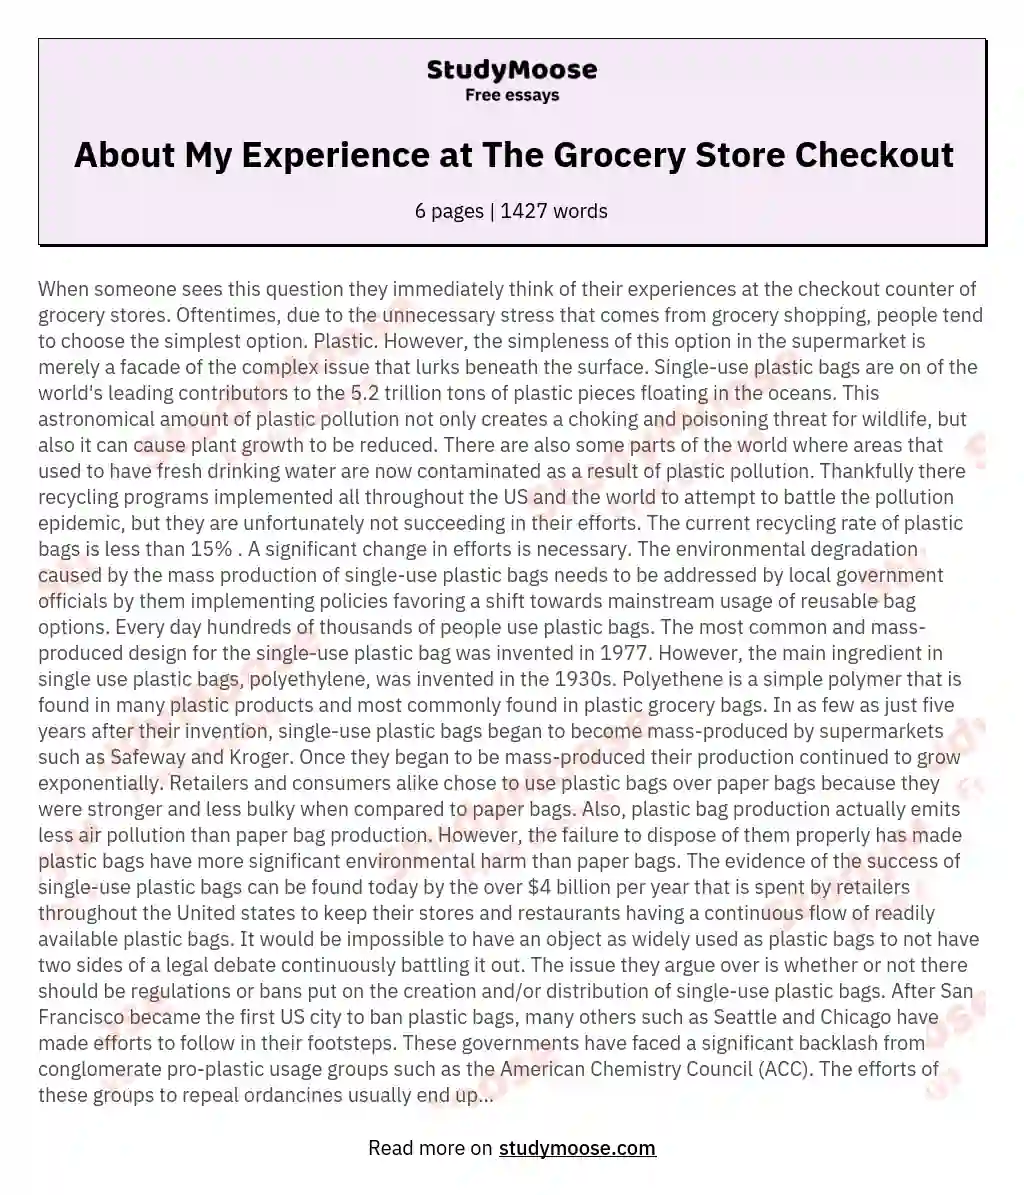 About My Experience at The Grocery Store Checkout essay